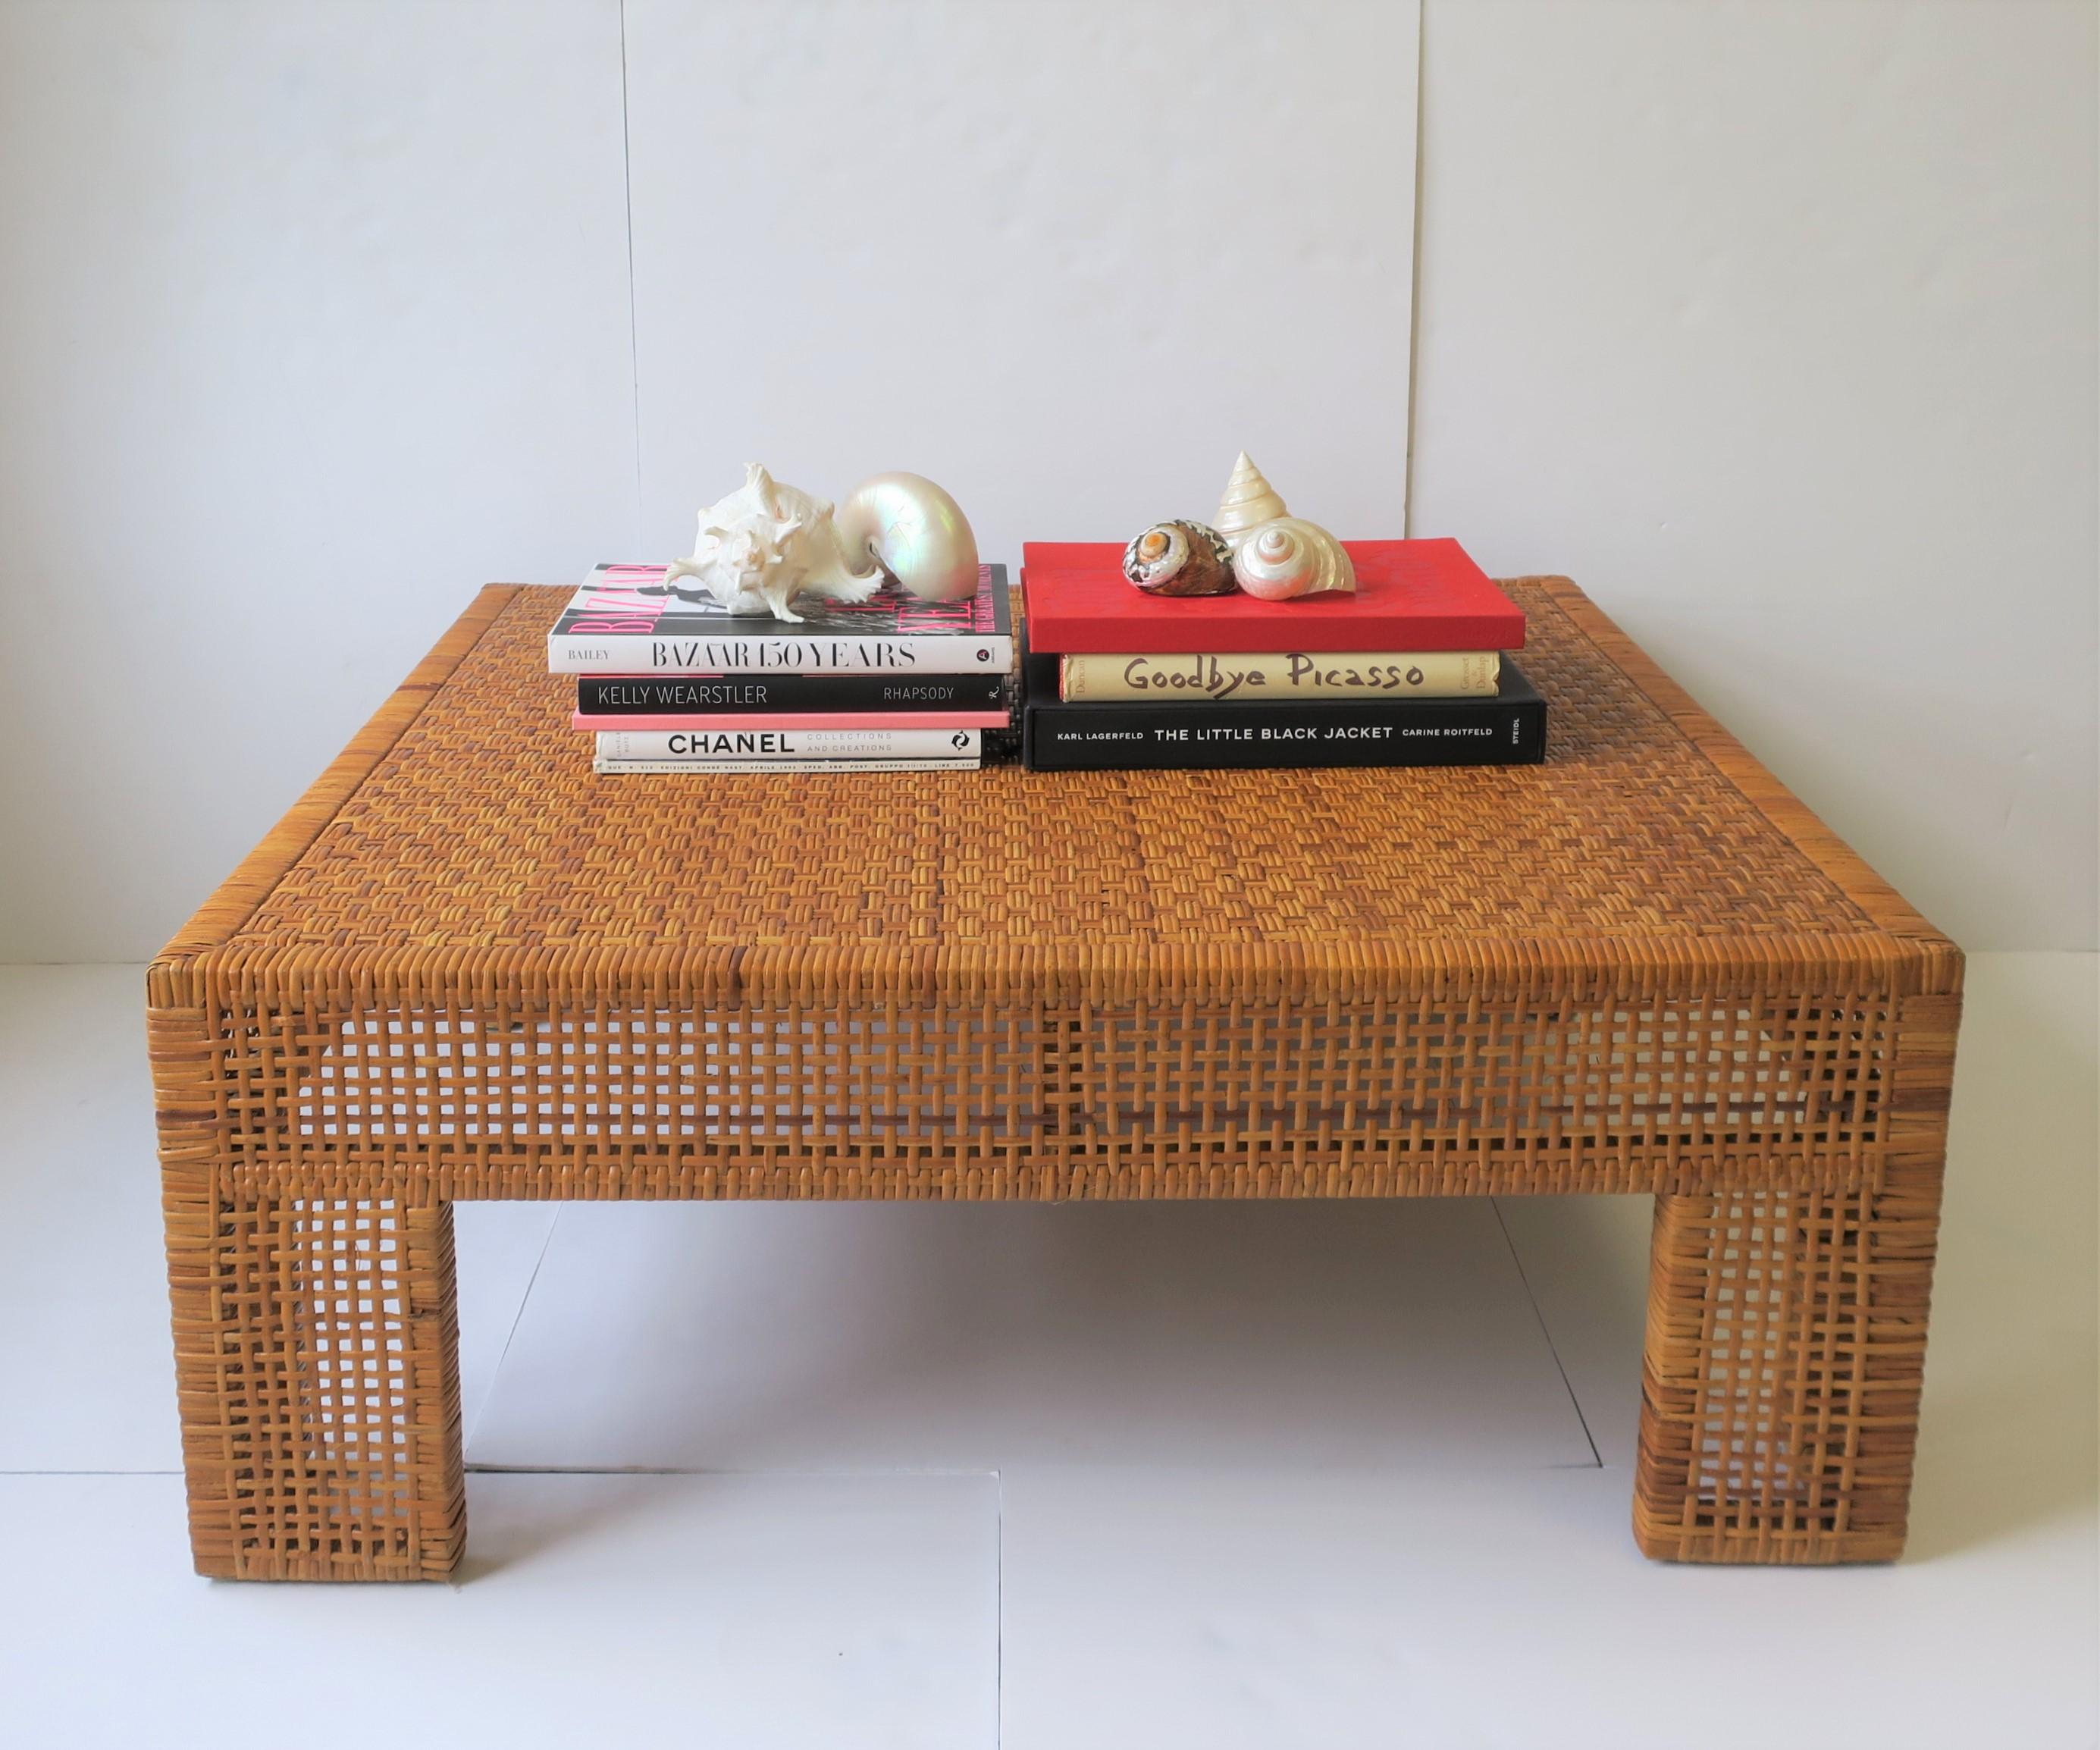 A very beautiful large wicker rattan coffee or cocktail table, circa late 20th century, 1980s - 1990s. Tabletop is reinforced underneath as show in image #15. 

Table measures: 41.75